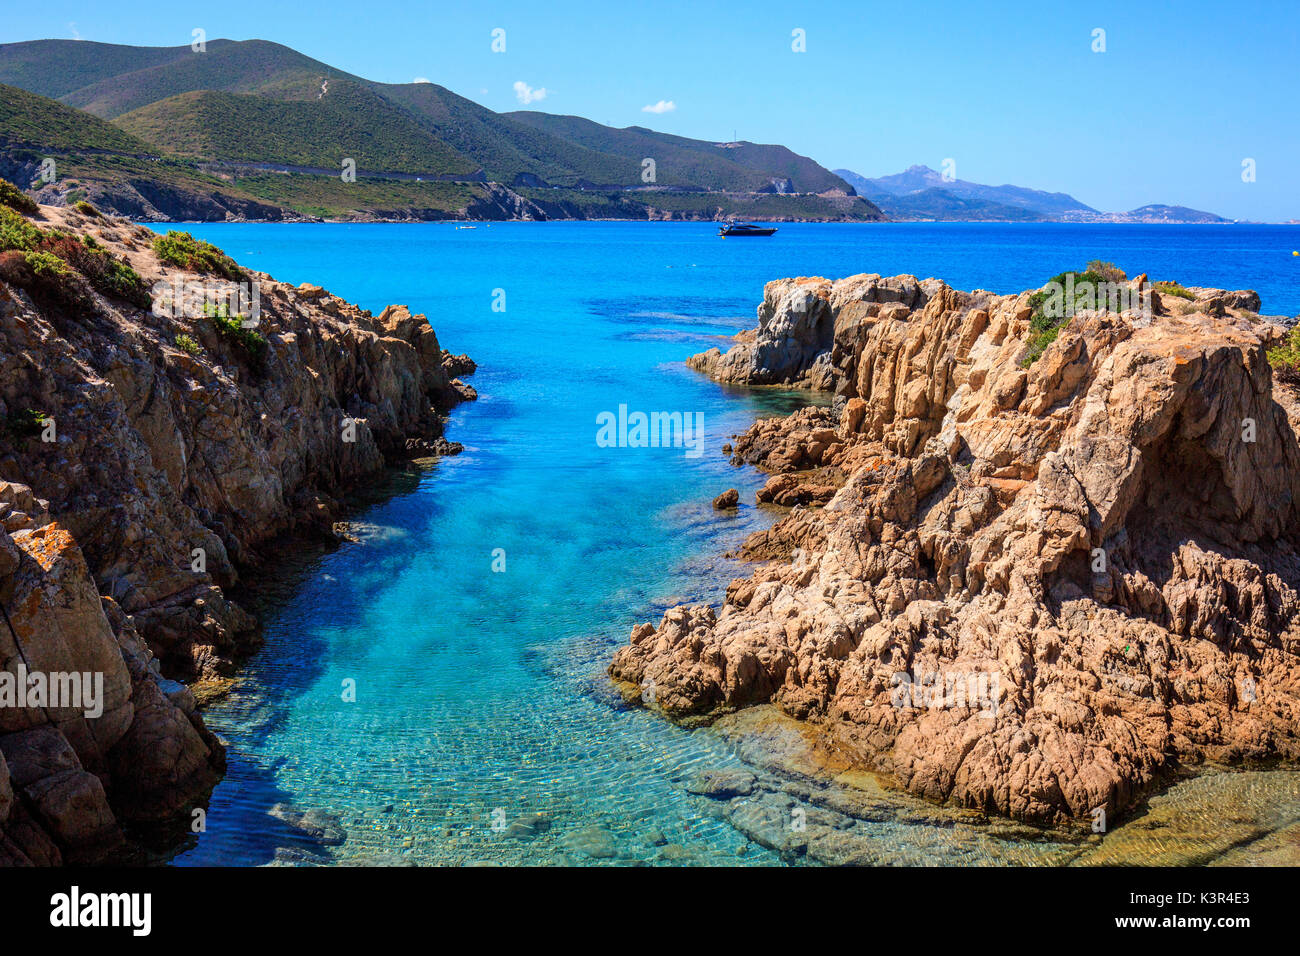 France, Corse, clear water at Ostriconi beach, Balagne Stock Photo